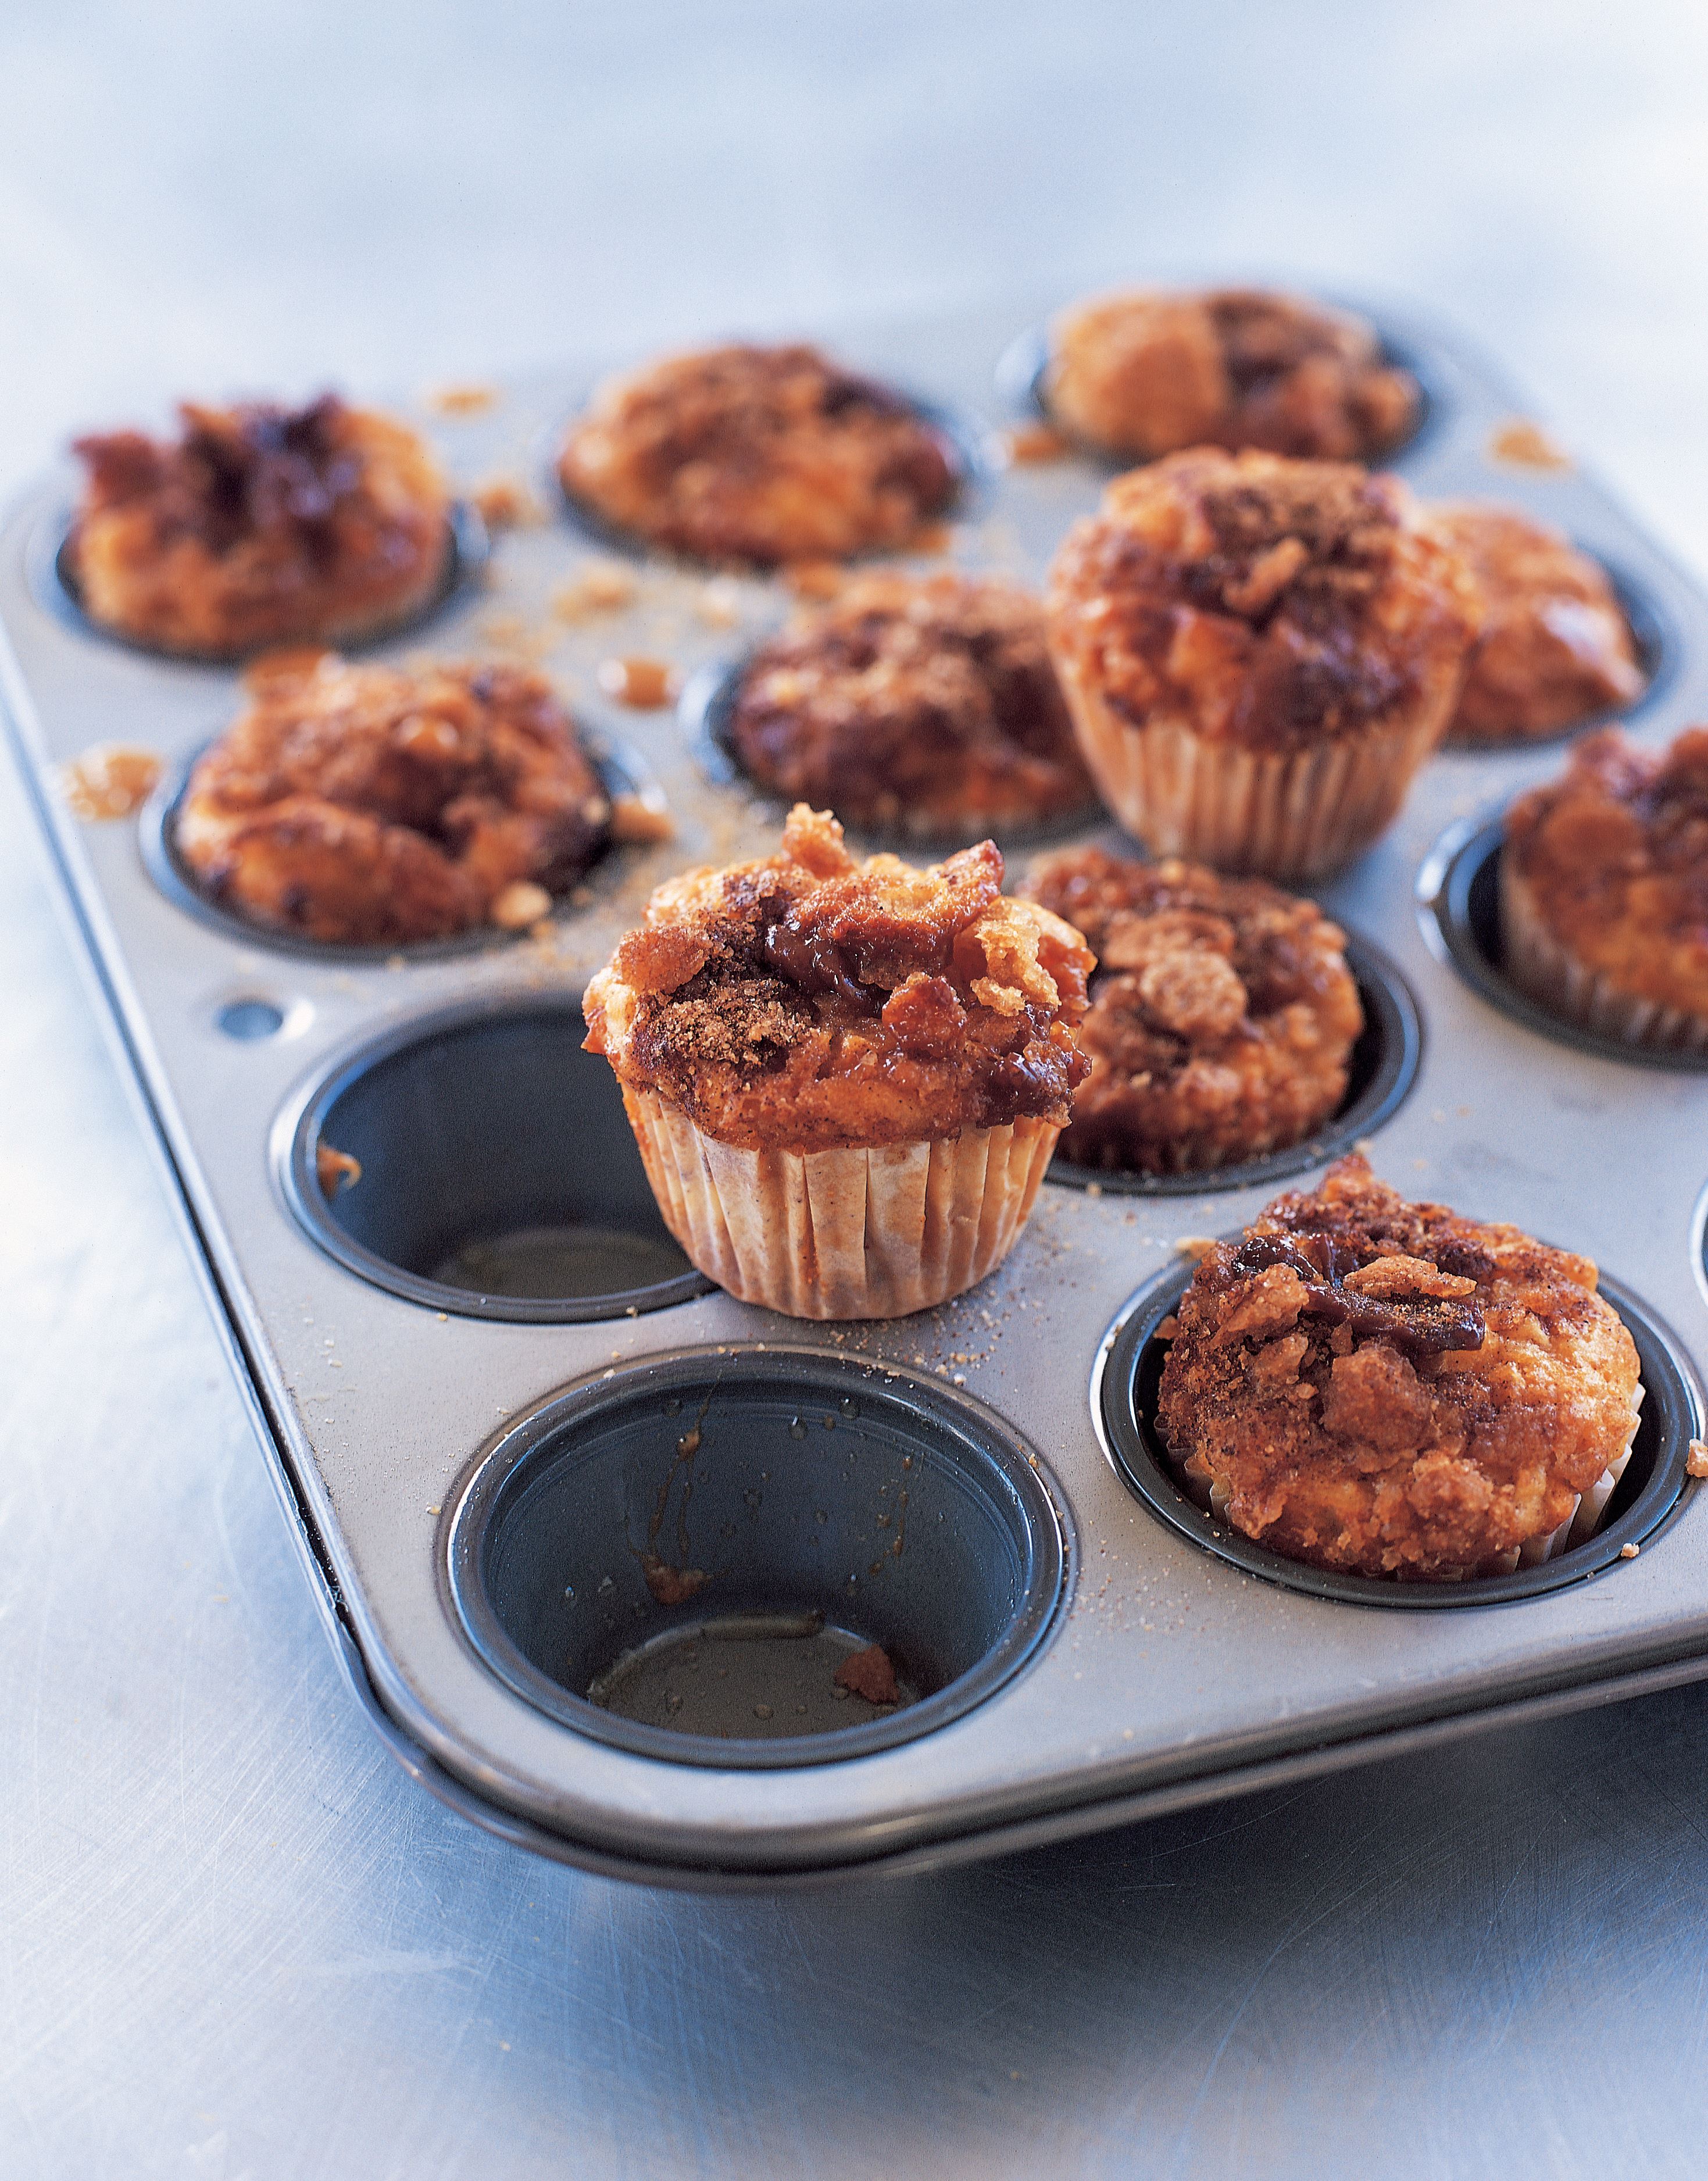 Apple and toffee muffins